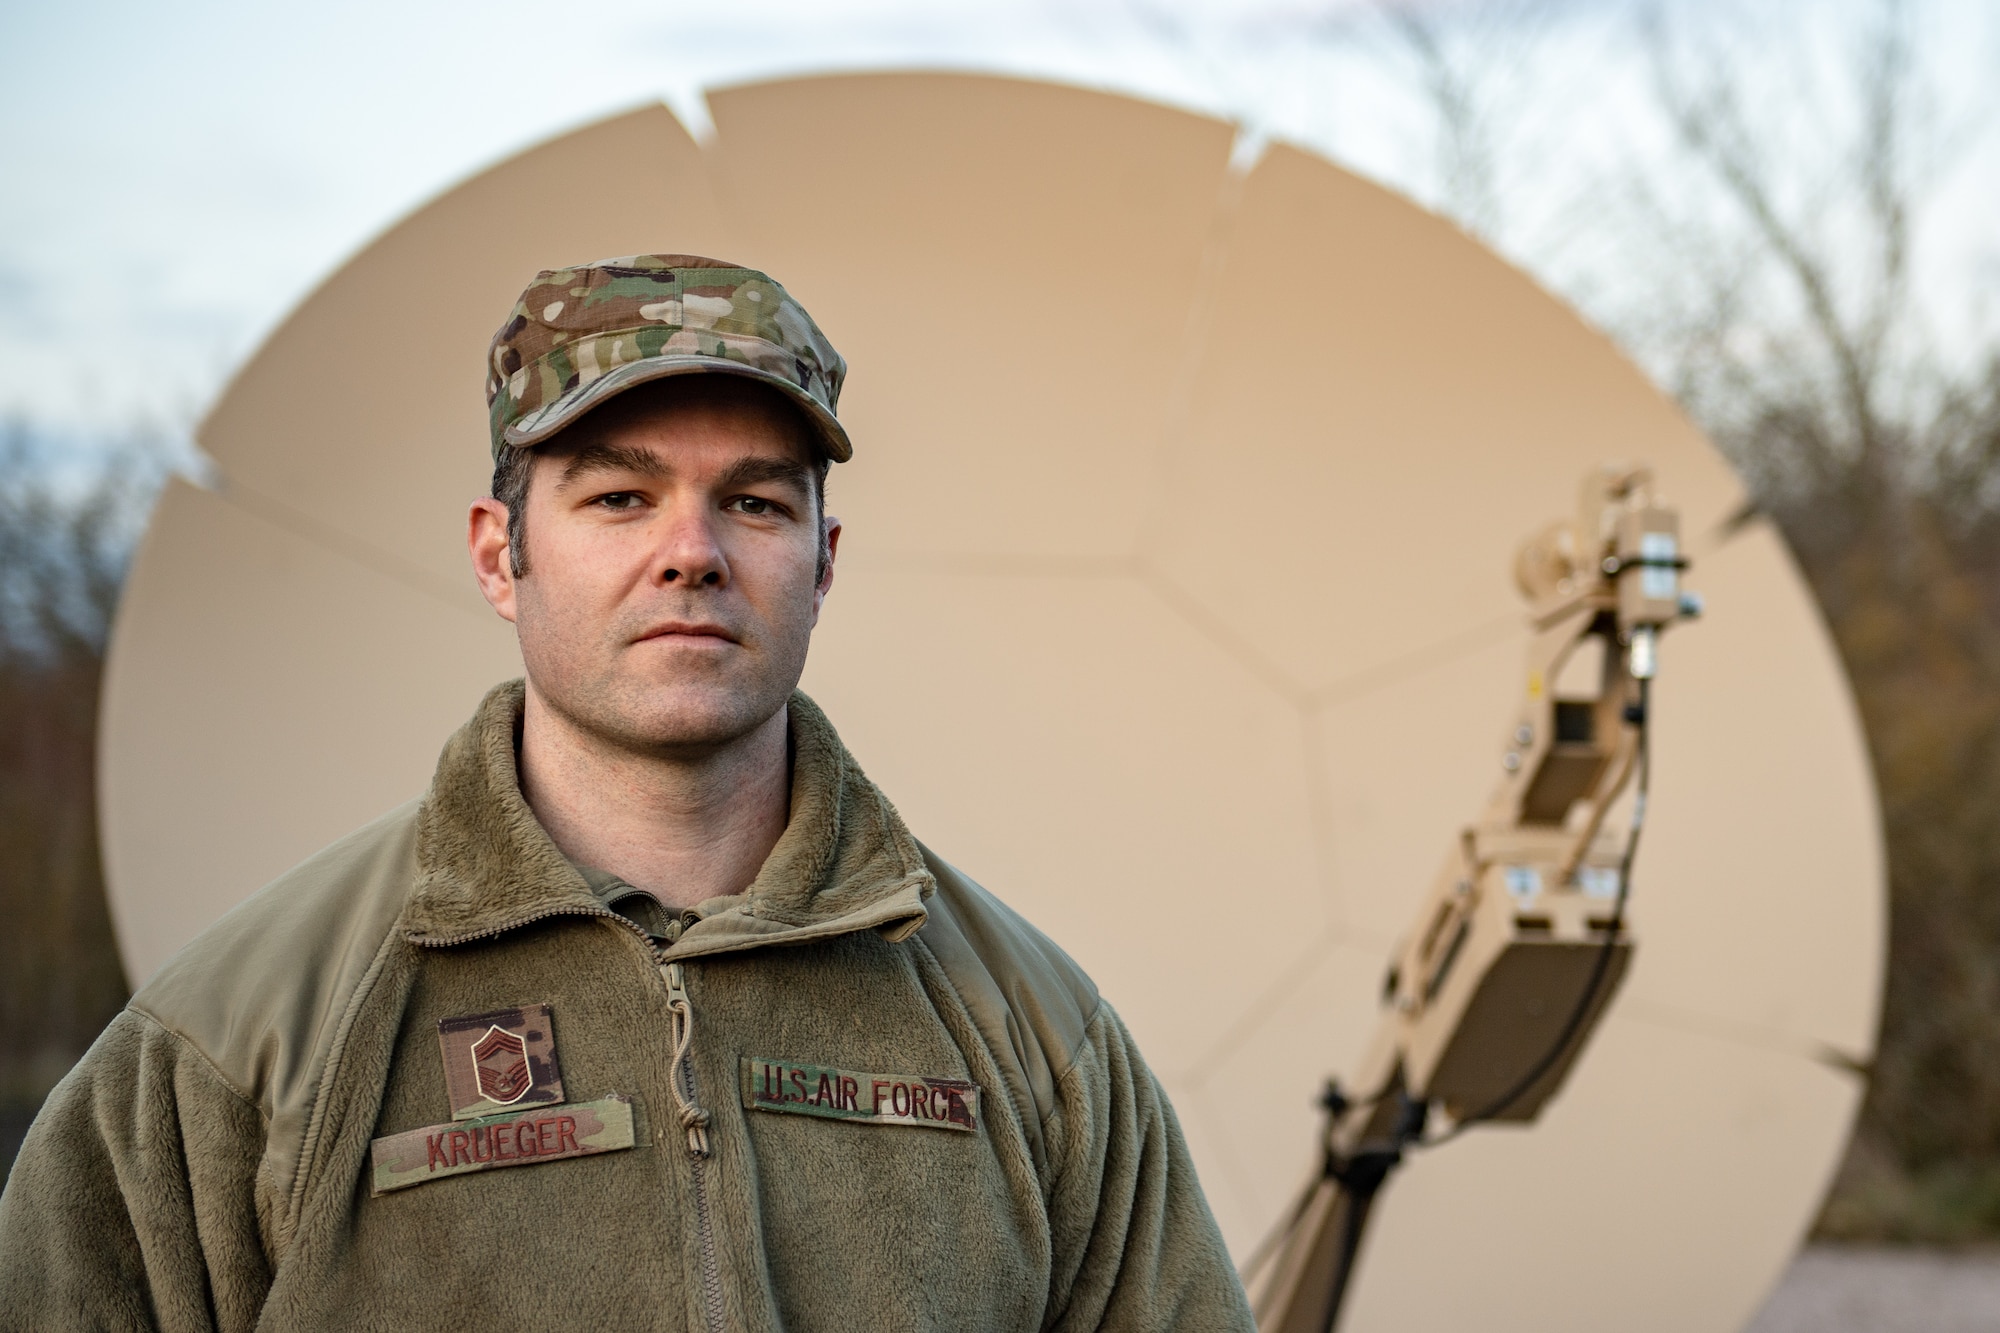 U.S. Air Force Chief Master Sgt. Brandon Krueger, 1st Combat Communications Squadron operations superintendent, poses for a photo during exercise Heavy Rain in Grostenquin, France, Jan. 15, 2020. During the exercise, Krueger observed 1st CBCS Airmen and provided feedback in dealing with a contested communications environment. (U.S. Air Force photo by Staff Sgt. Devin Boyer)